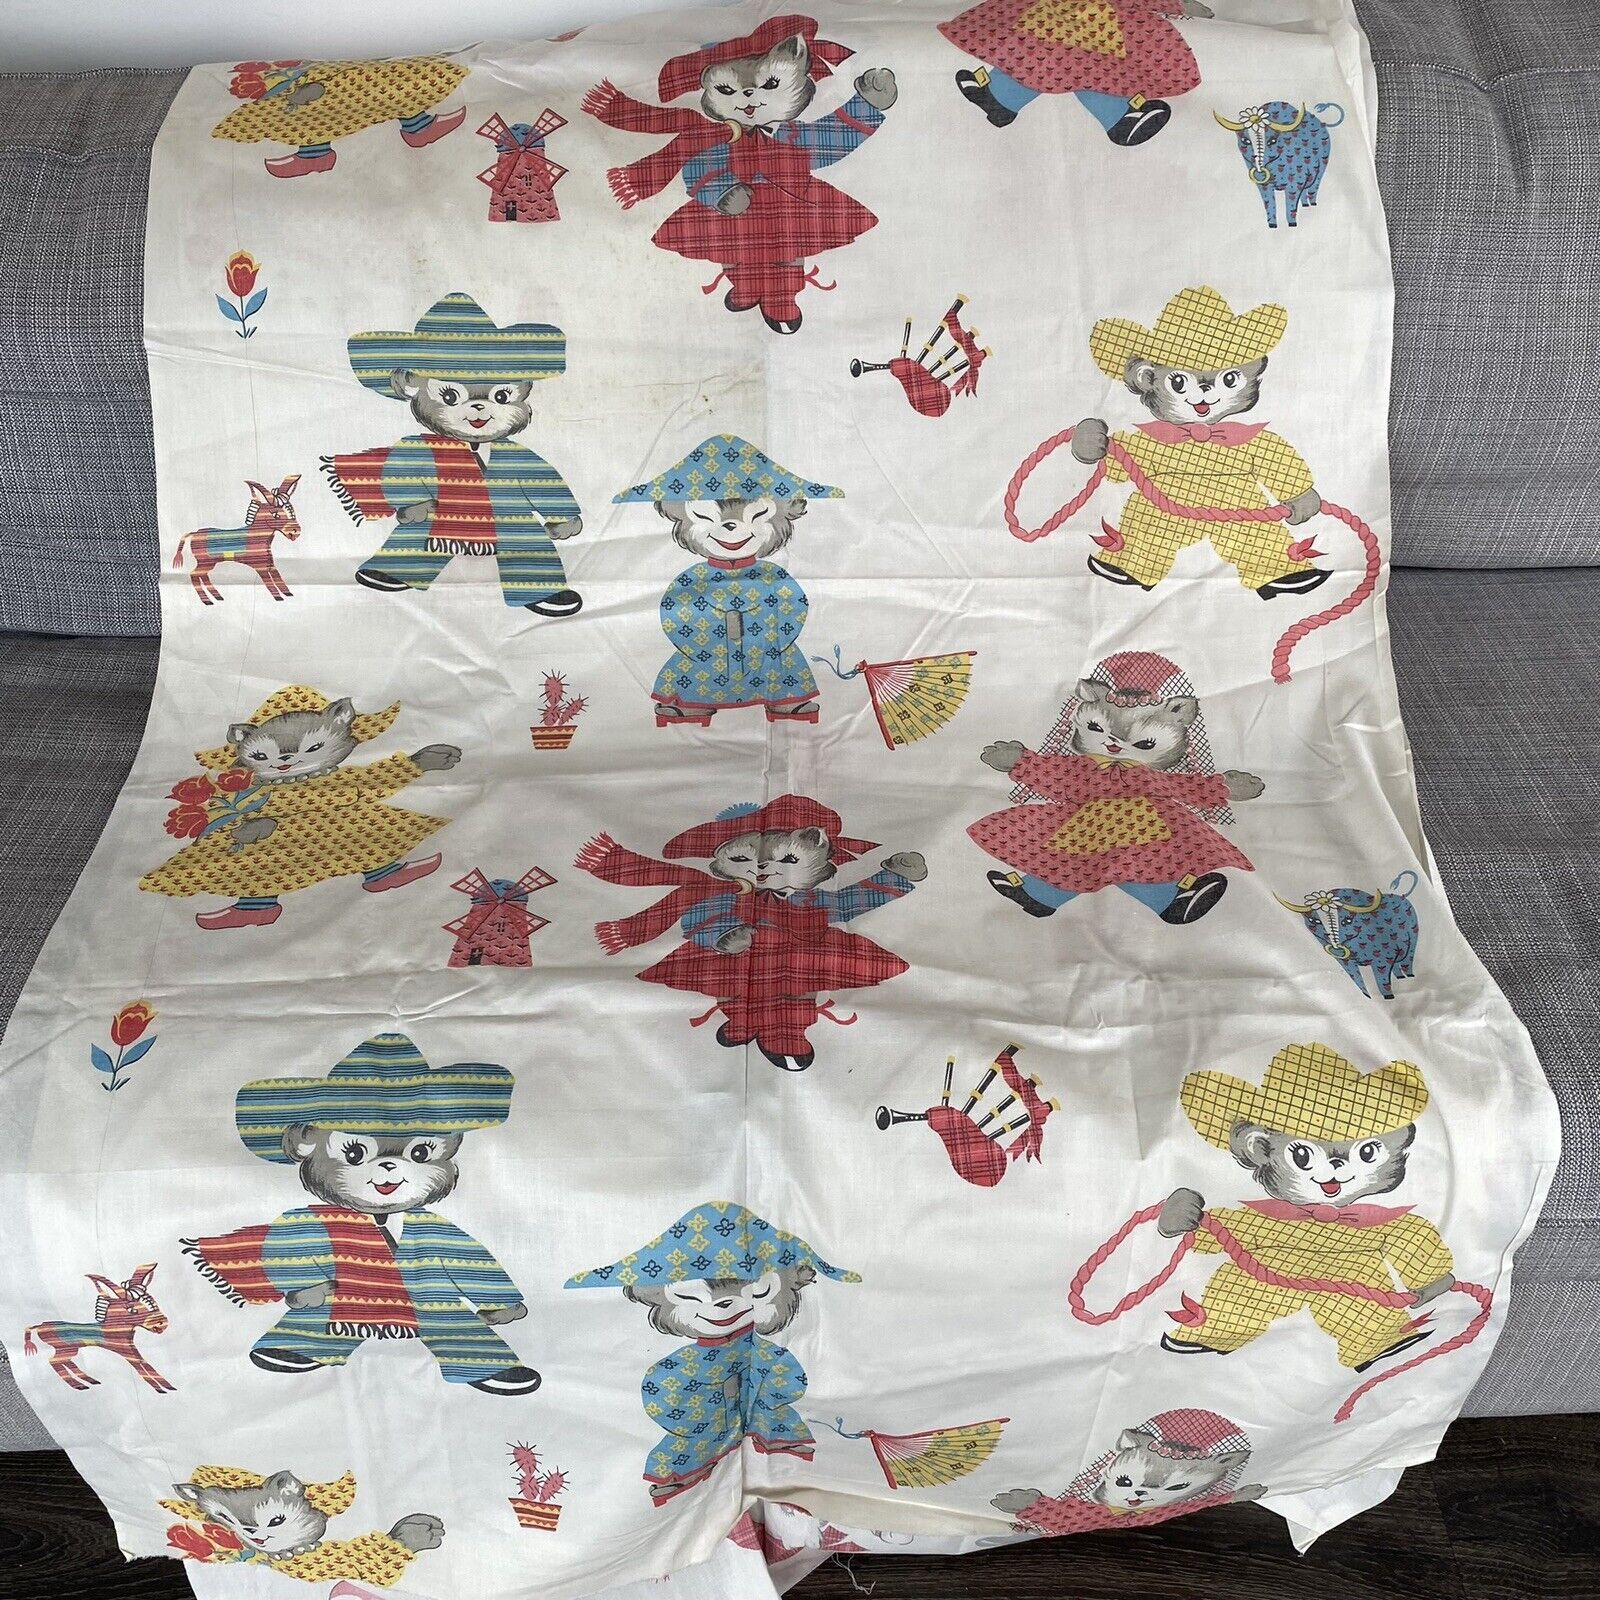 Vintage Children's Fabric Cats Kittens Of the World 34'x116